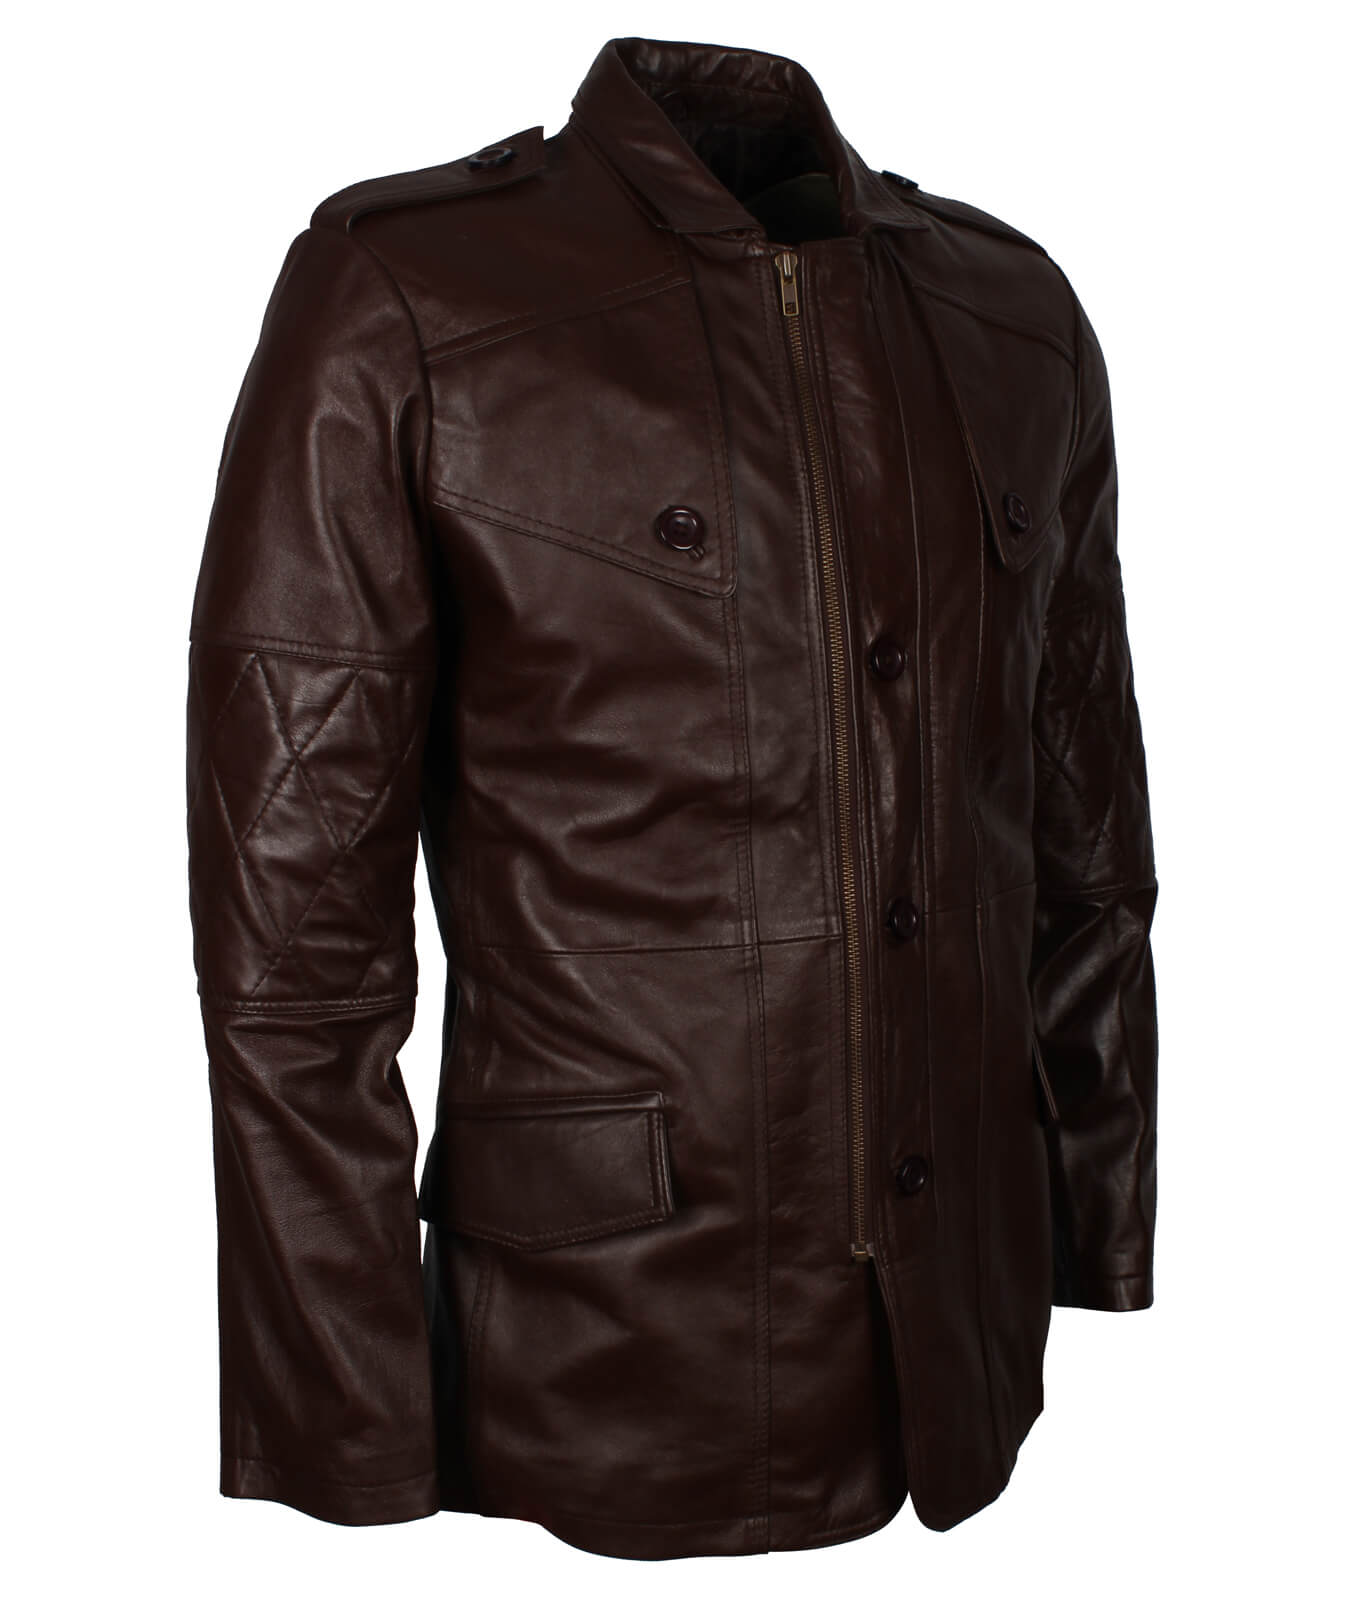 Military Officer Style Brown Leather Coat